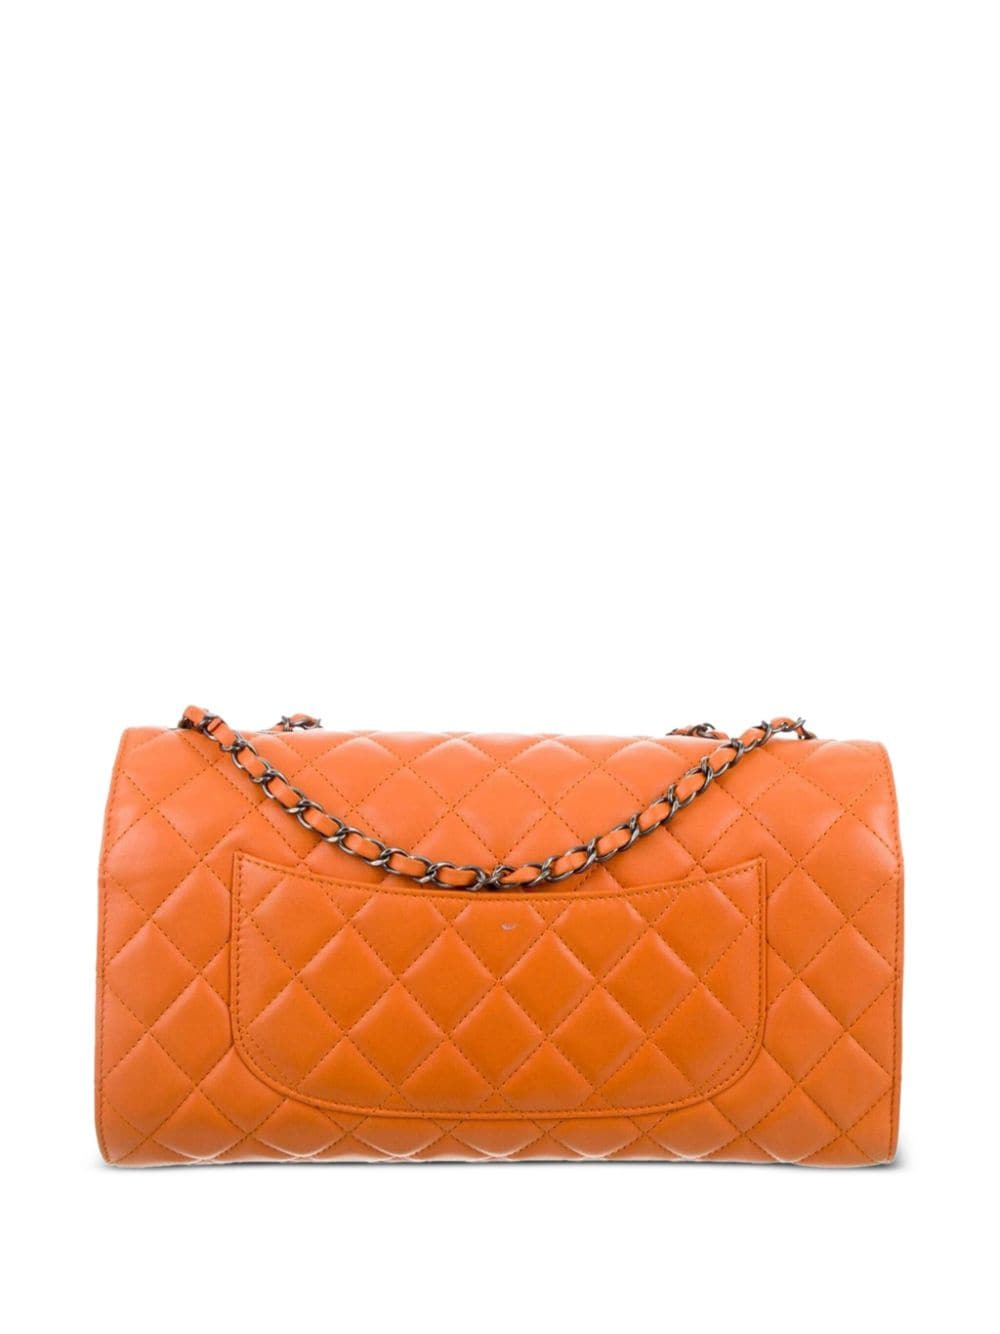 Pre-owned Chanel 2014 Classic Flap Expandable Shoulder Bag In Orange